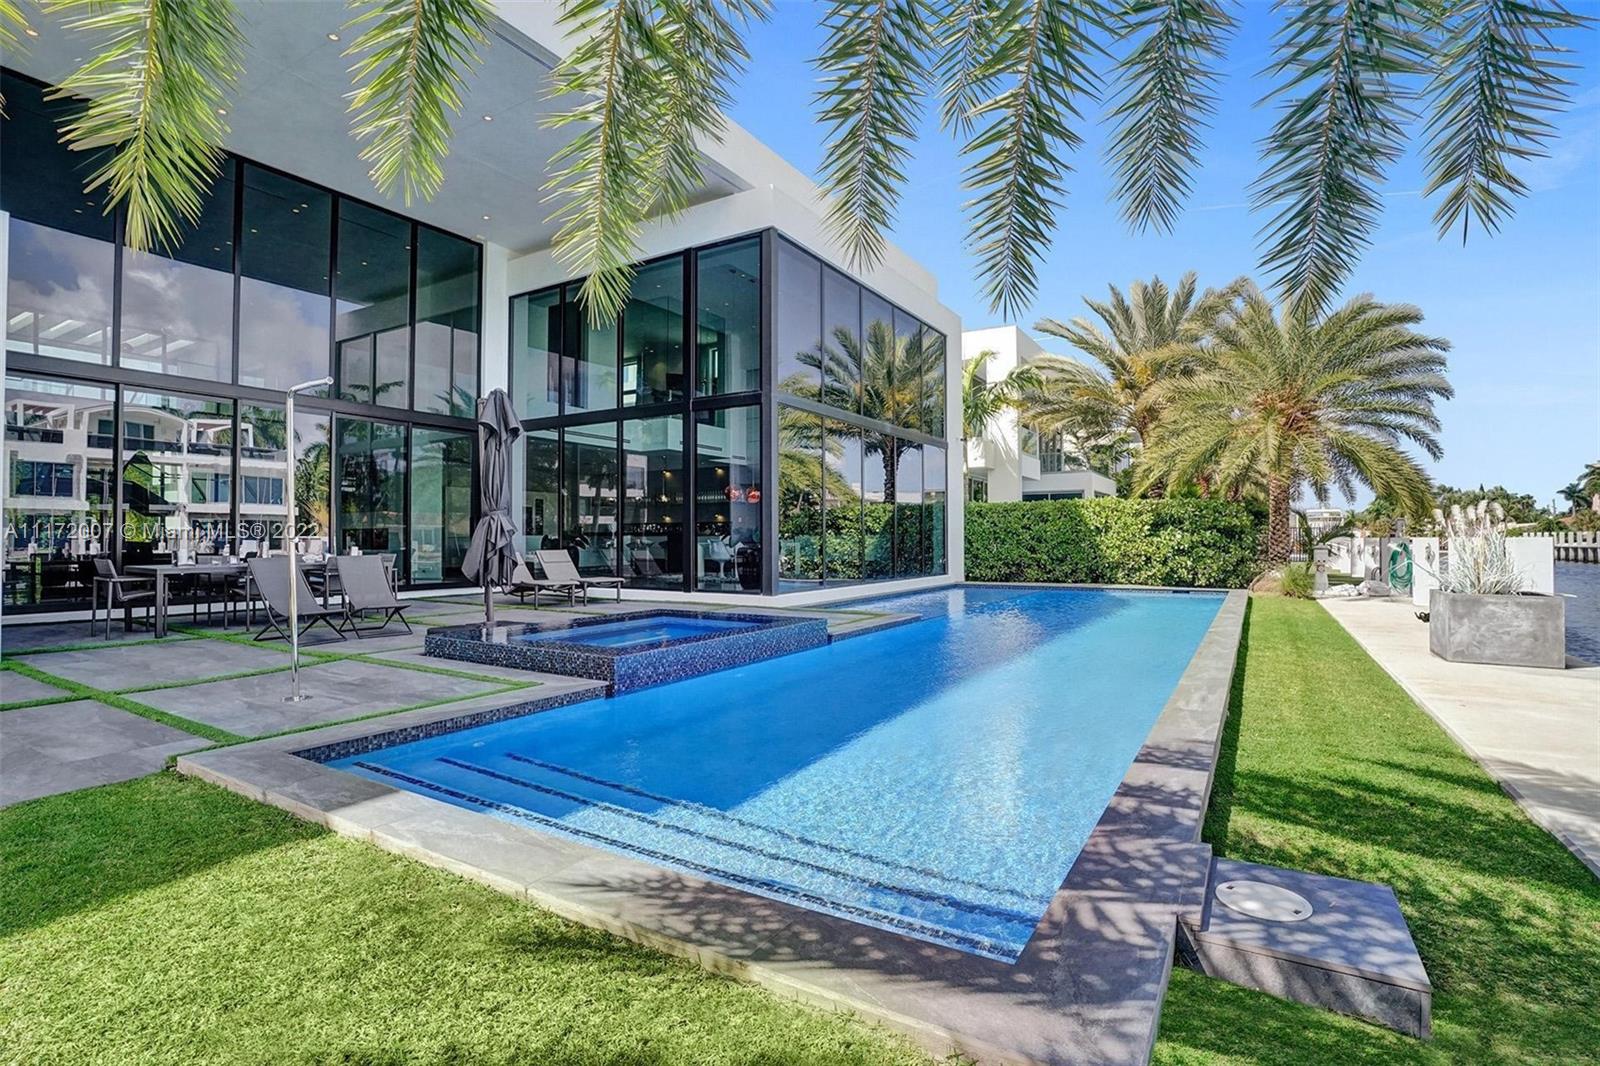 Exceptional, modern turn-key home just minutes off Las Olas Blvd.! Built in 2019 to the highest standards and exquisitely finished this residence has never been rented. A 100’ dock accommodates large yachts, no fixed bridges allow easy ocean access. The double height entry foyer leads into a great room with open bar and fireplace overlooking patio, pool and canal. Open kitchen with high end Bulthaup cabinets, Subzero and Gaggenau appliances, as well as a family room and open gym complete the ground floor. The 2nd floor features all 4 bedrooms including a spacious master suite in its own wing, with a large private balcony, walk-in closet and luxurious bath. The home’s spacious outdoor dining & lounge area with heated pool, BBQ and fire pit is perfect for enjoying lazy afternoons.